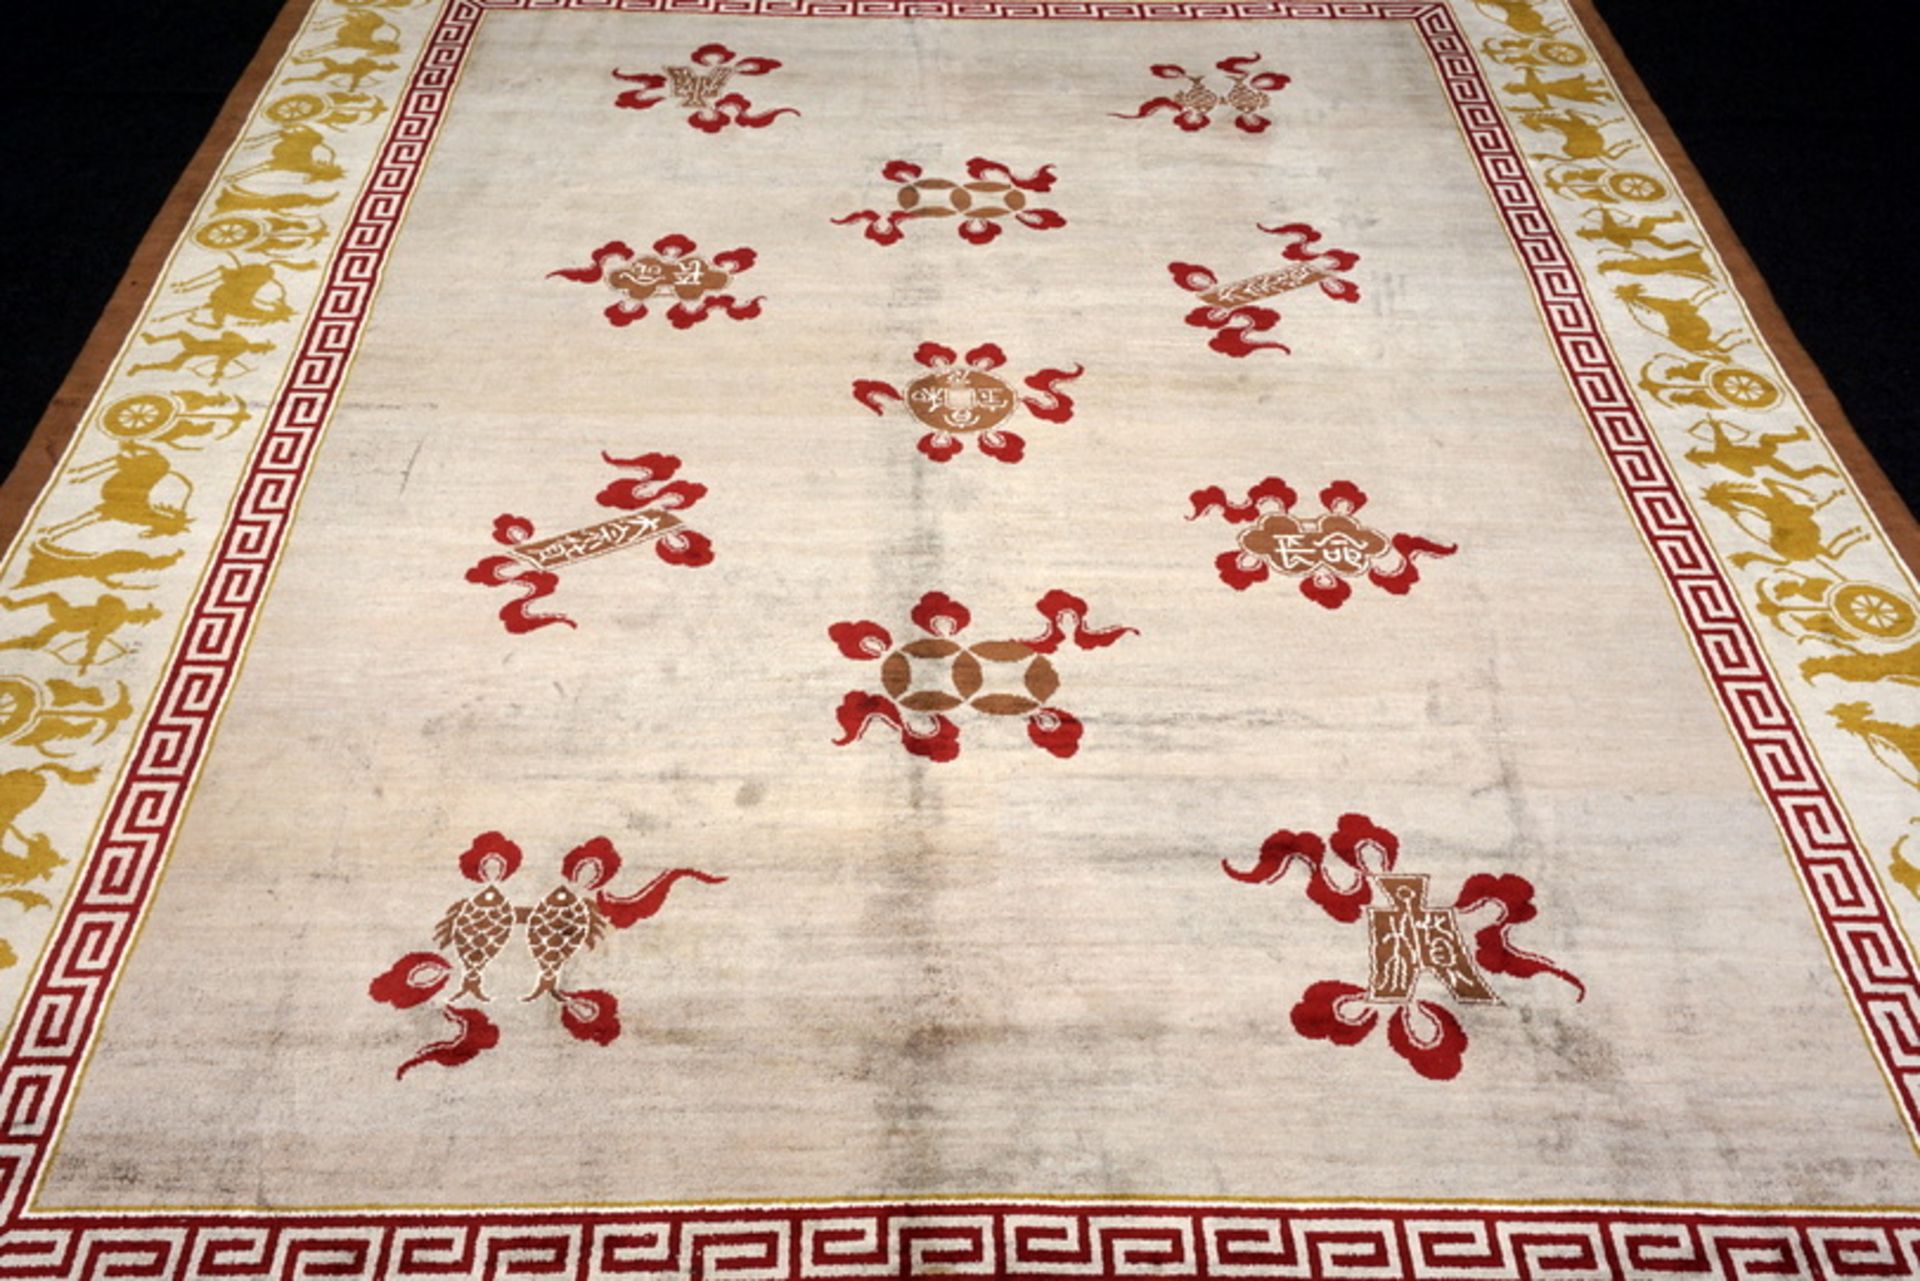 A Chinese Silk Carpet, Tientsin, Silk on Silk Foundation. The ivory field with a central column of - Image 3 of 27